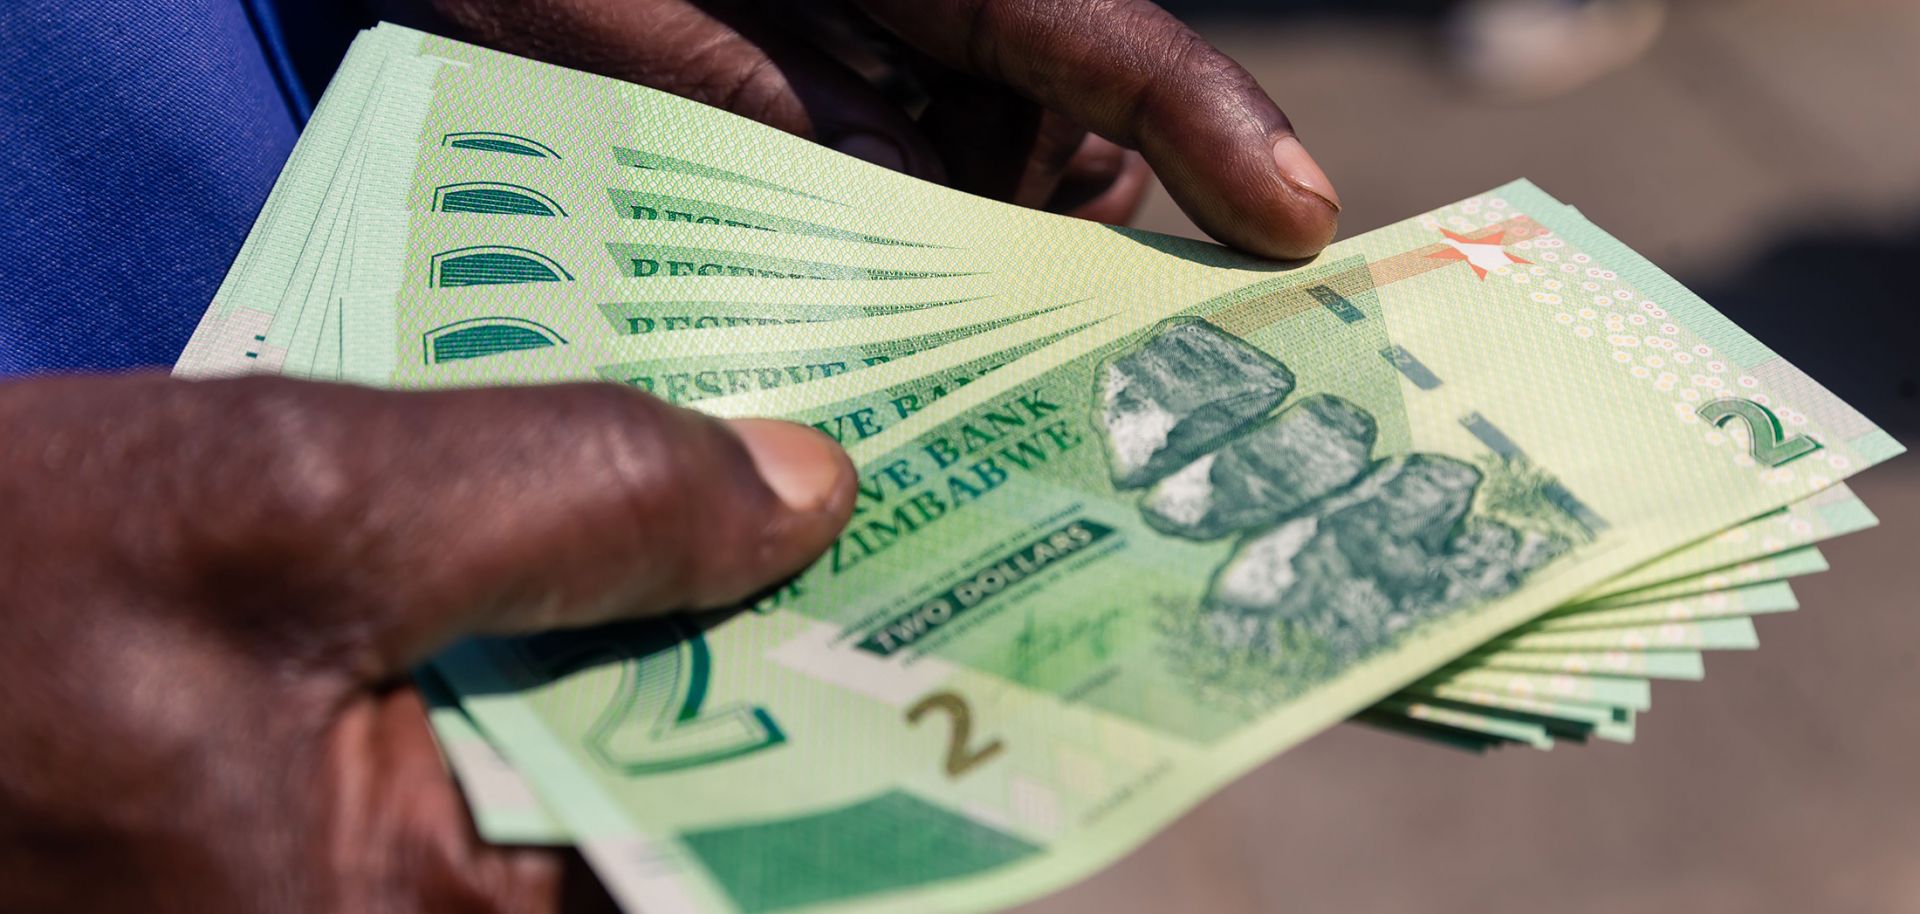 Zimbabwe’s introduction of new currency plagued by chaos